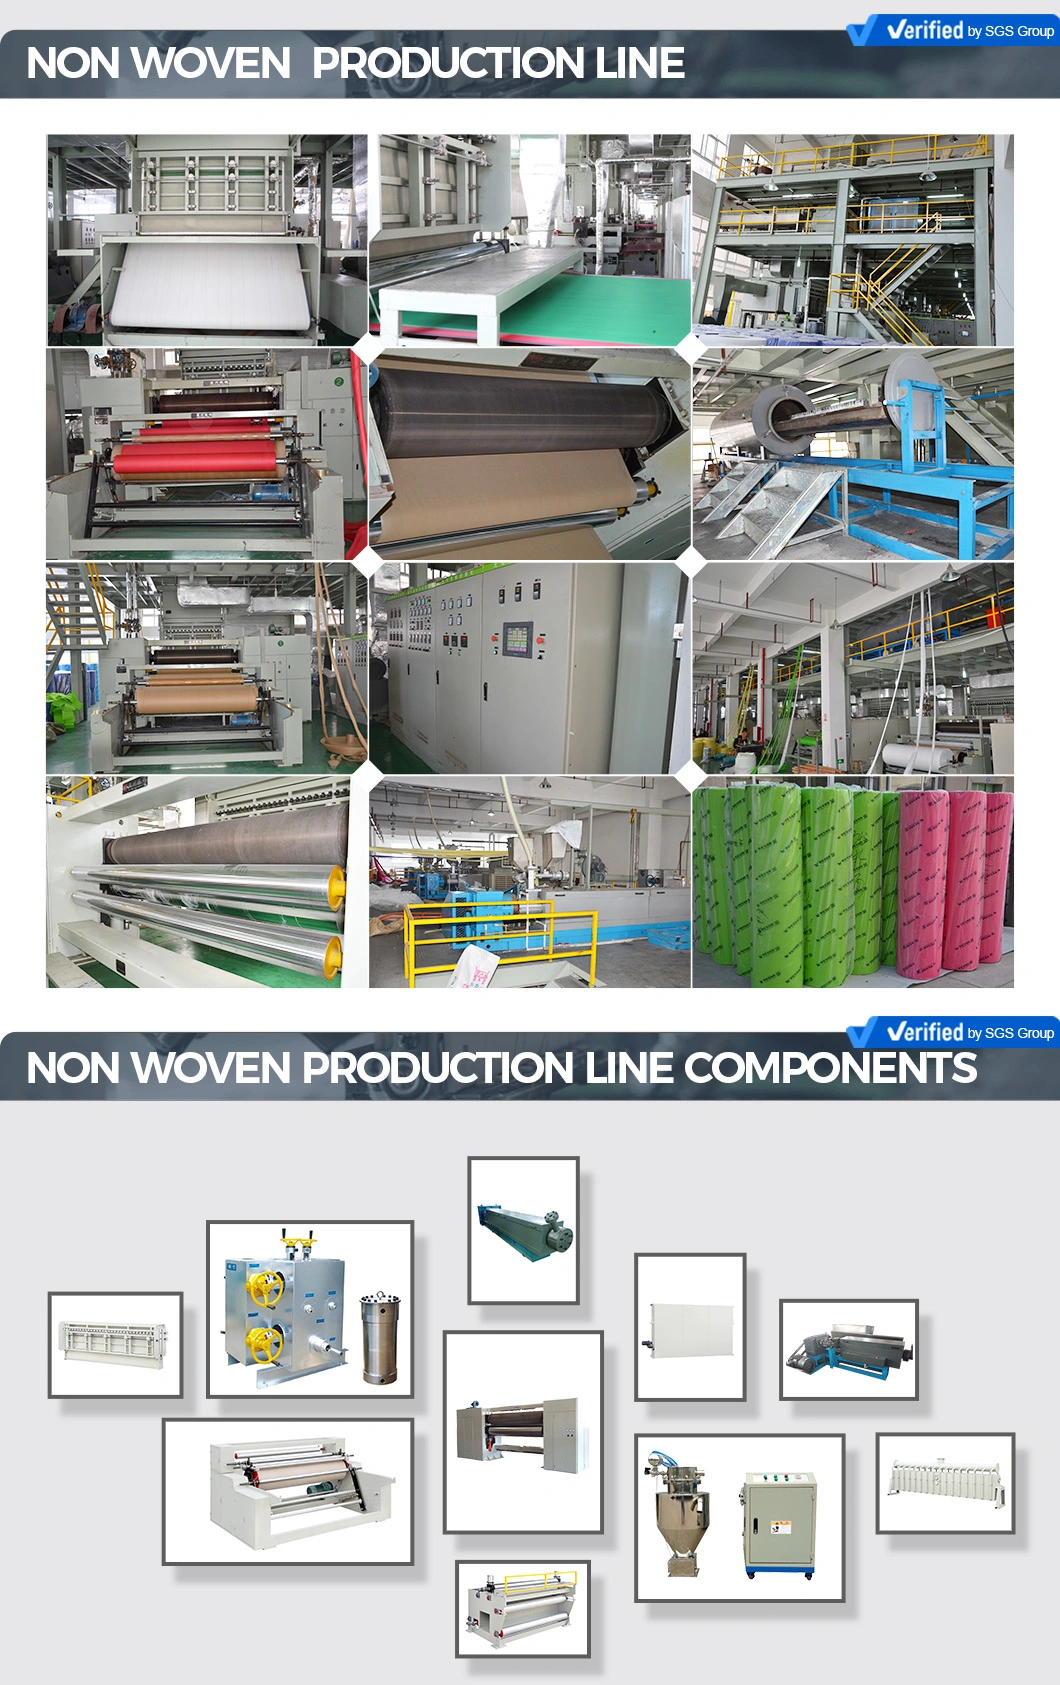 Non Woven Weaving Textile Machine for Making N95/KN95